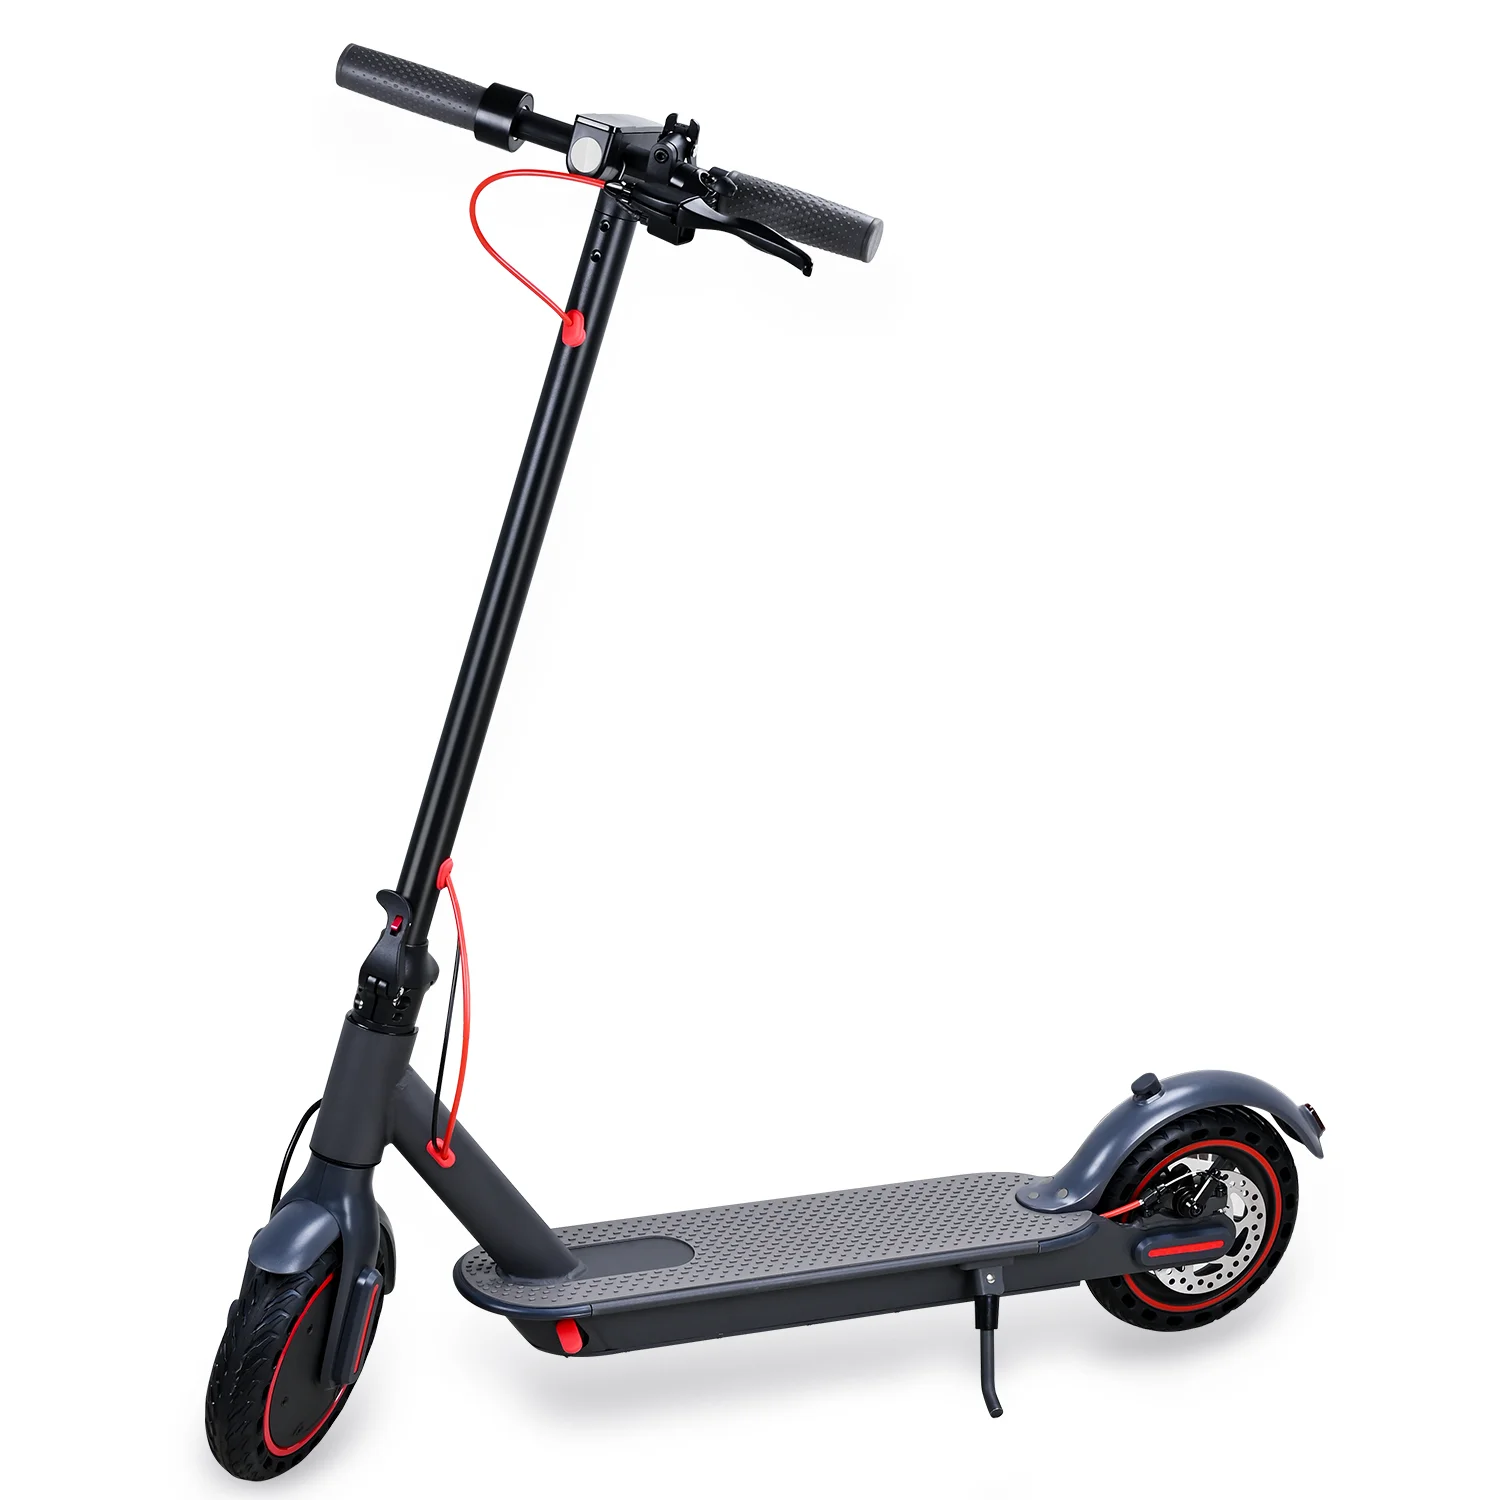 

xiaomi mi electric scooter pro 2 elektroroller M365 EU Warehouse free shipping 350W trottinette electric scooter for adult, Black,white